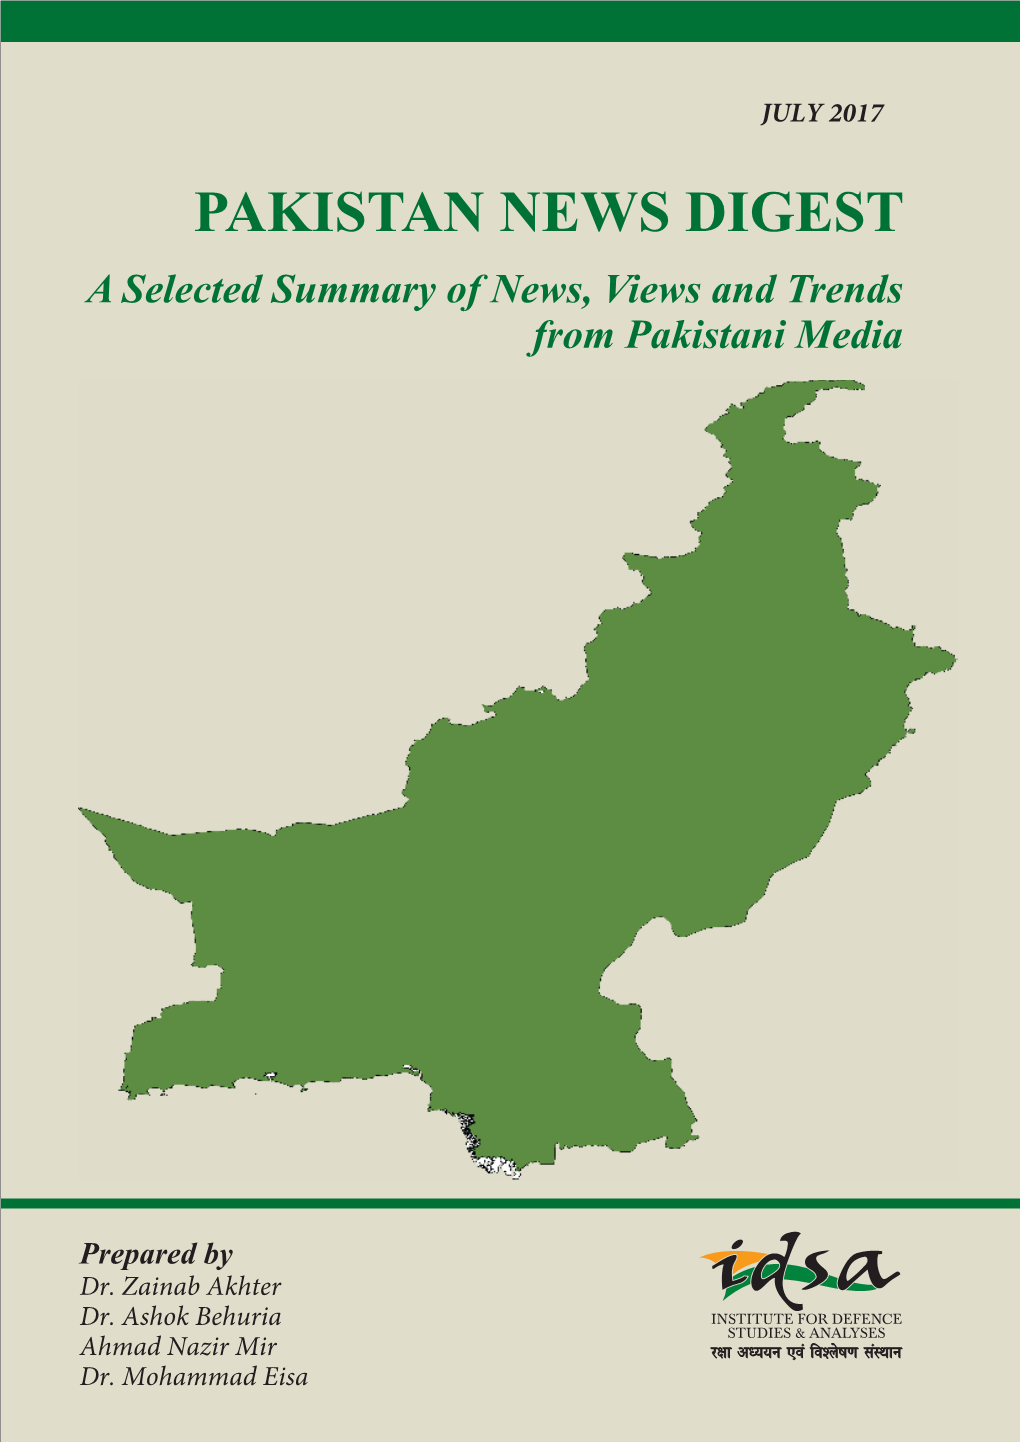 JULY 2017 PAKISTAN NEWS DIGEST a Selected Summary of News, Views and Trends from Pakistani Media